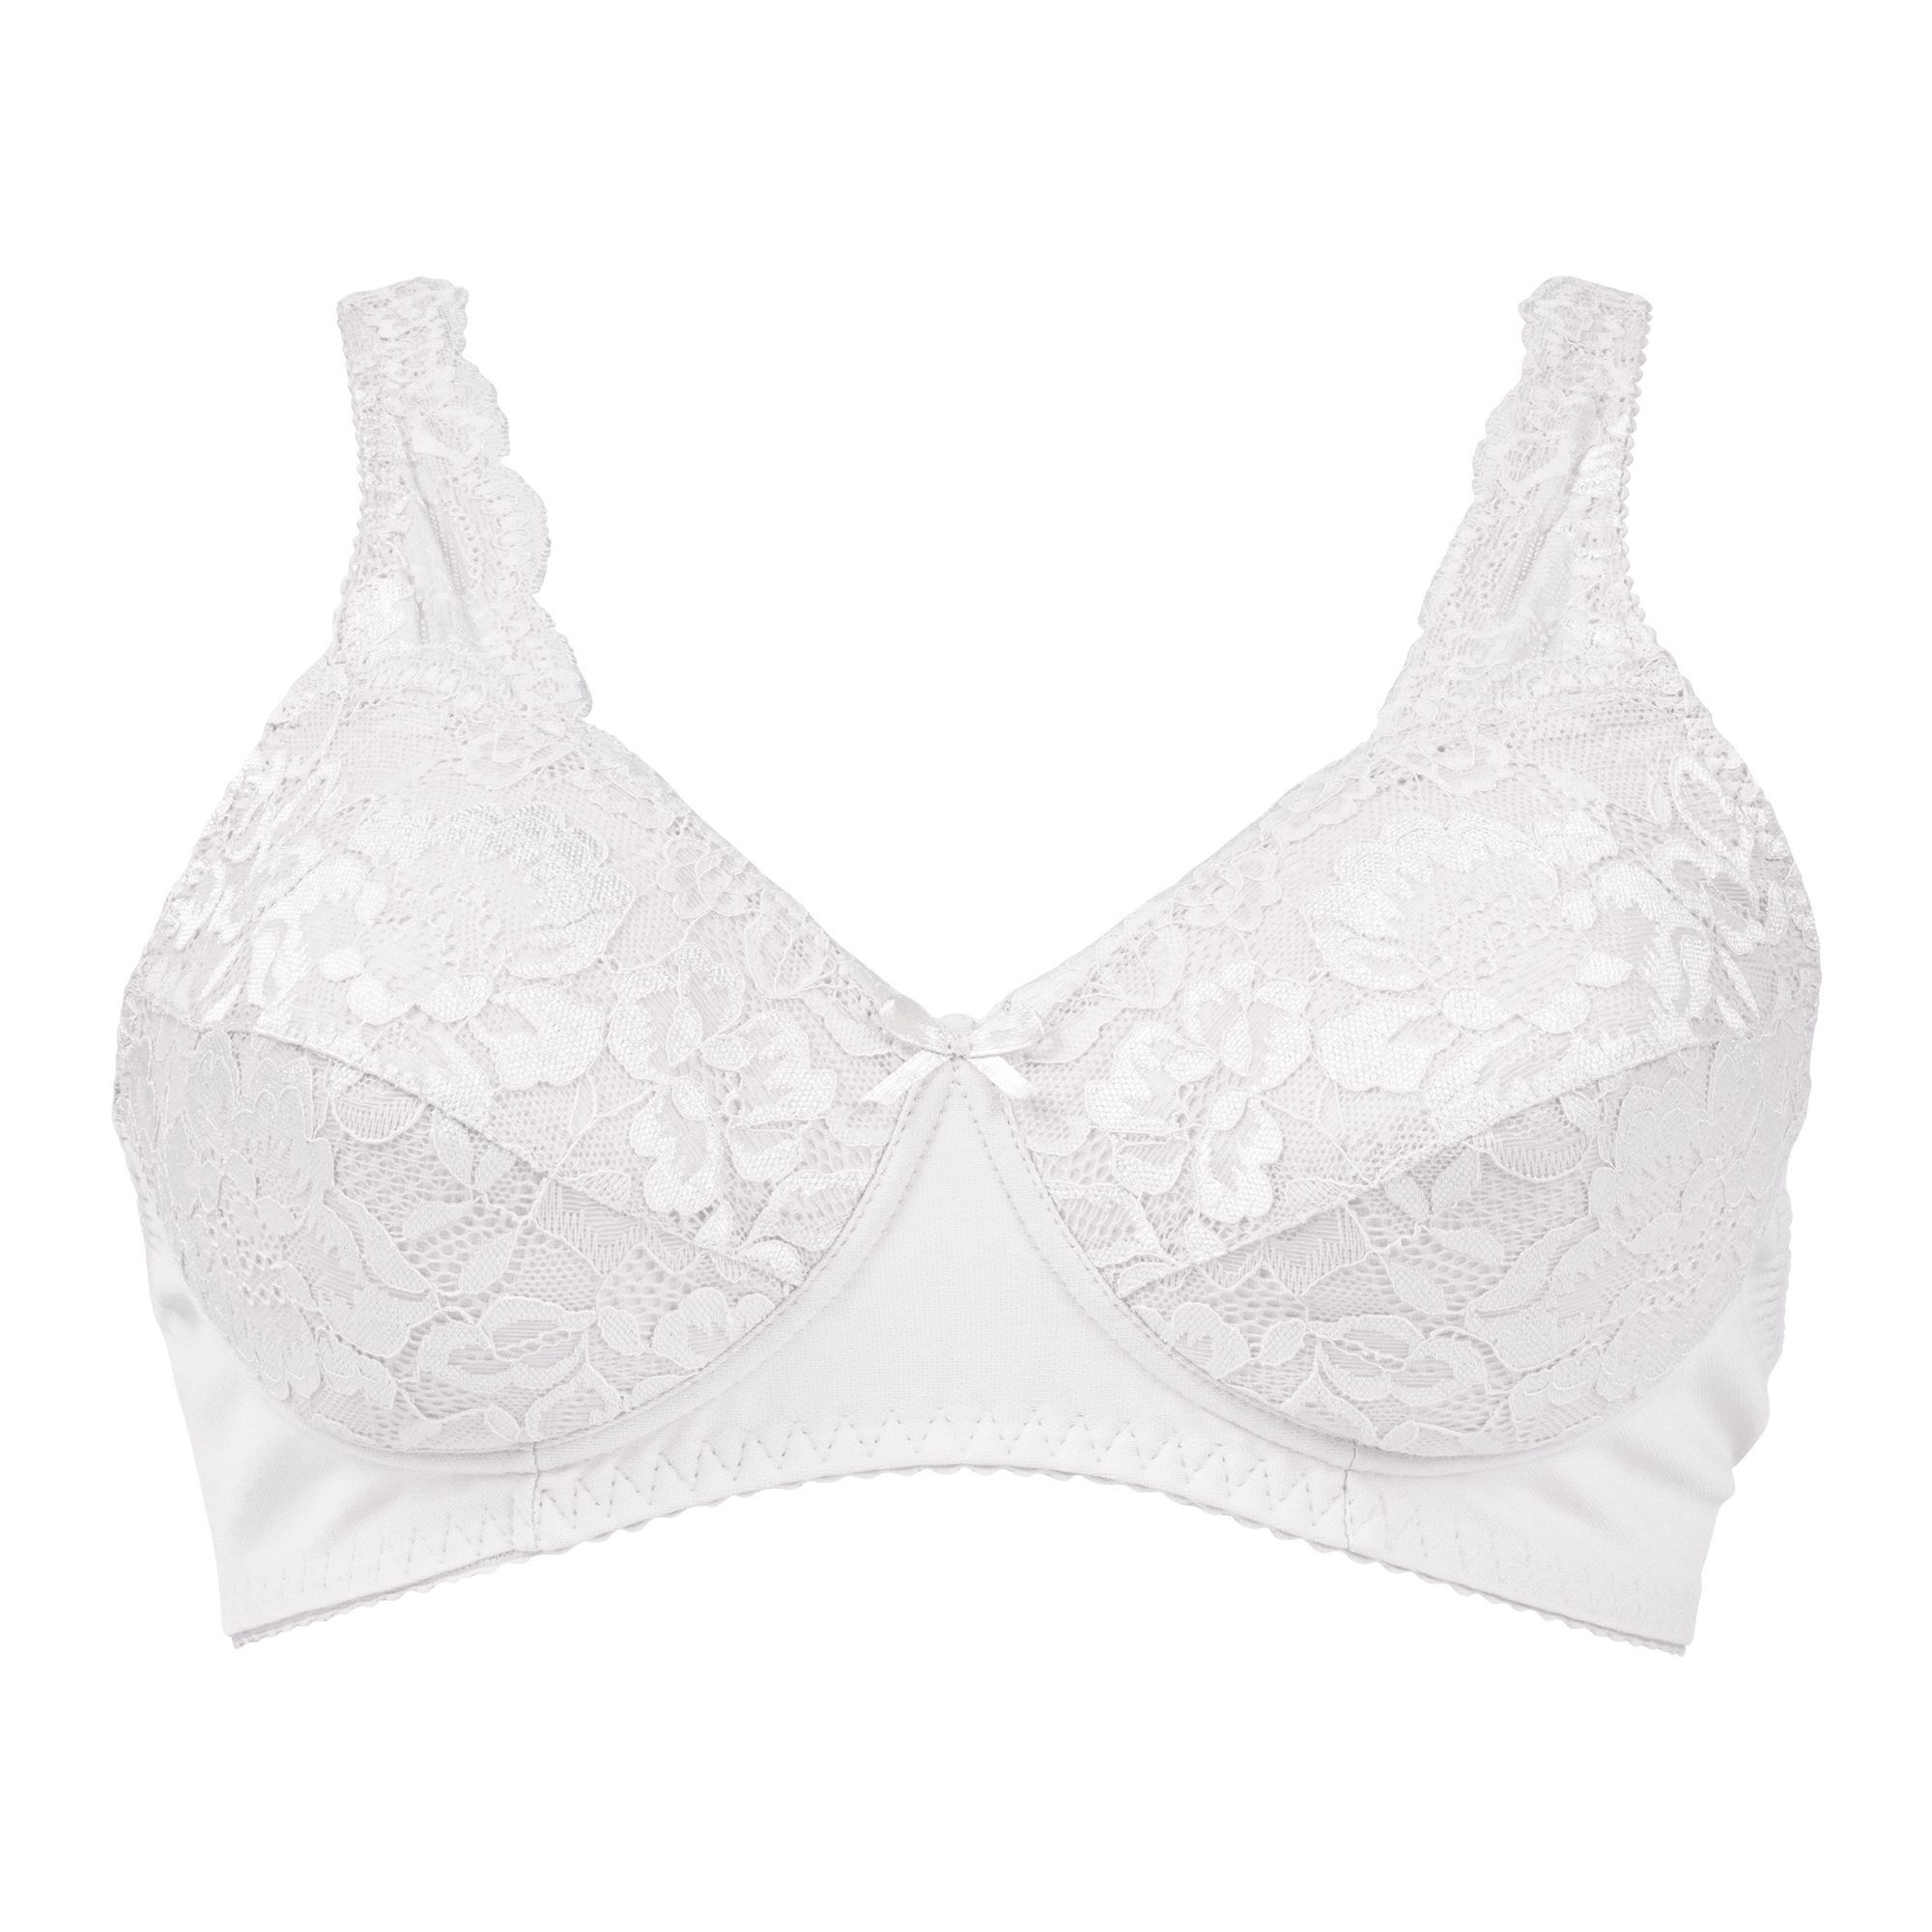 Order IFG Vision Bra, White Online at Special Price in Pakistan